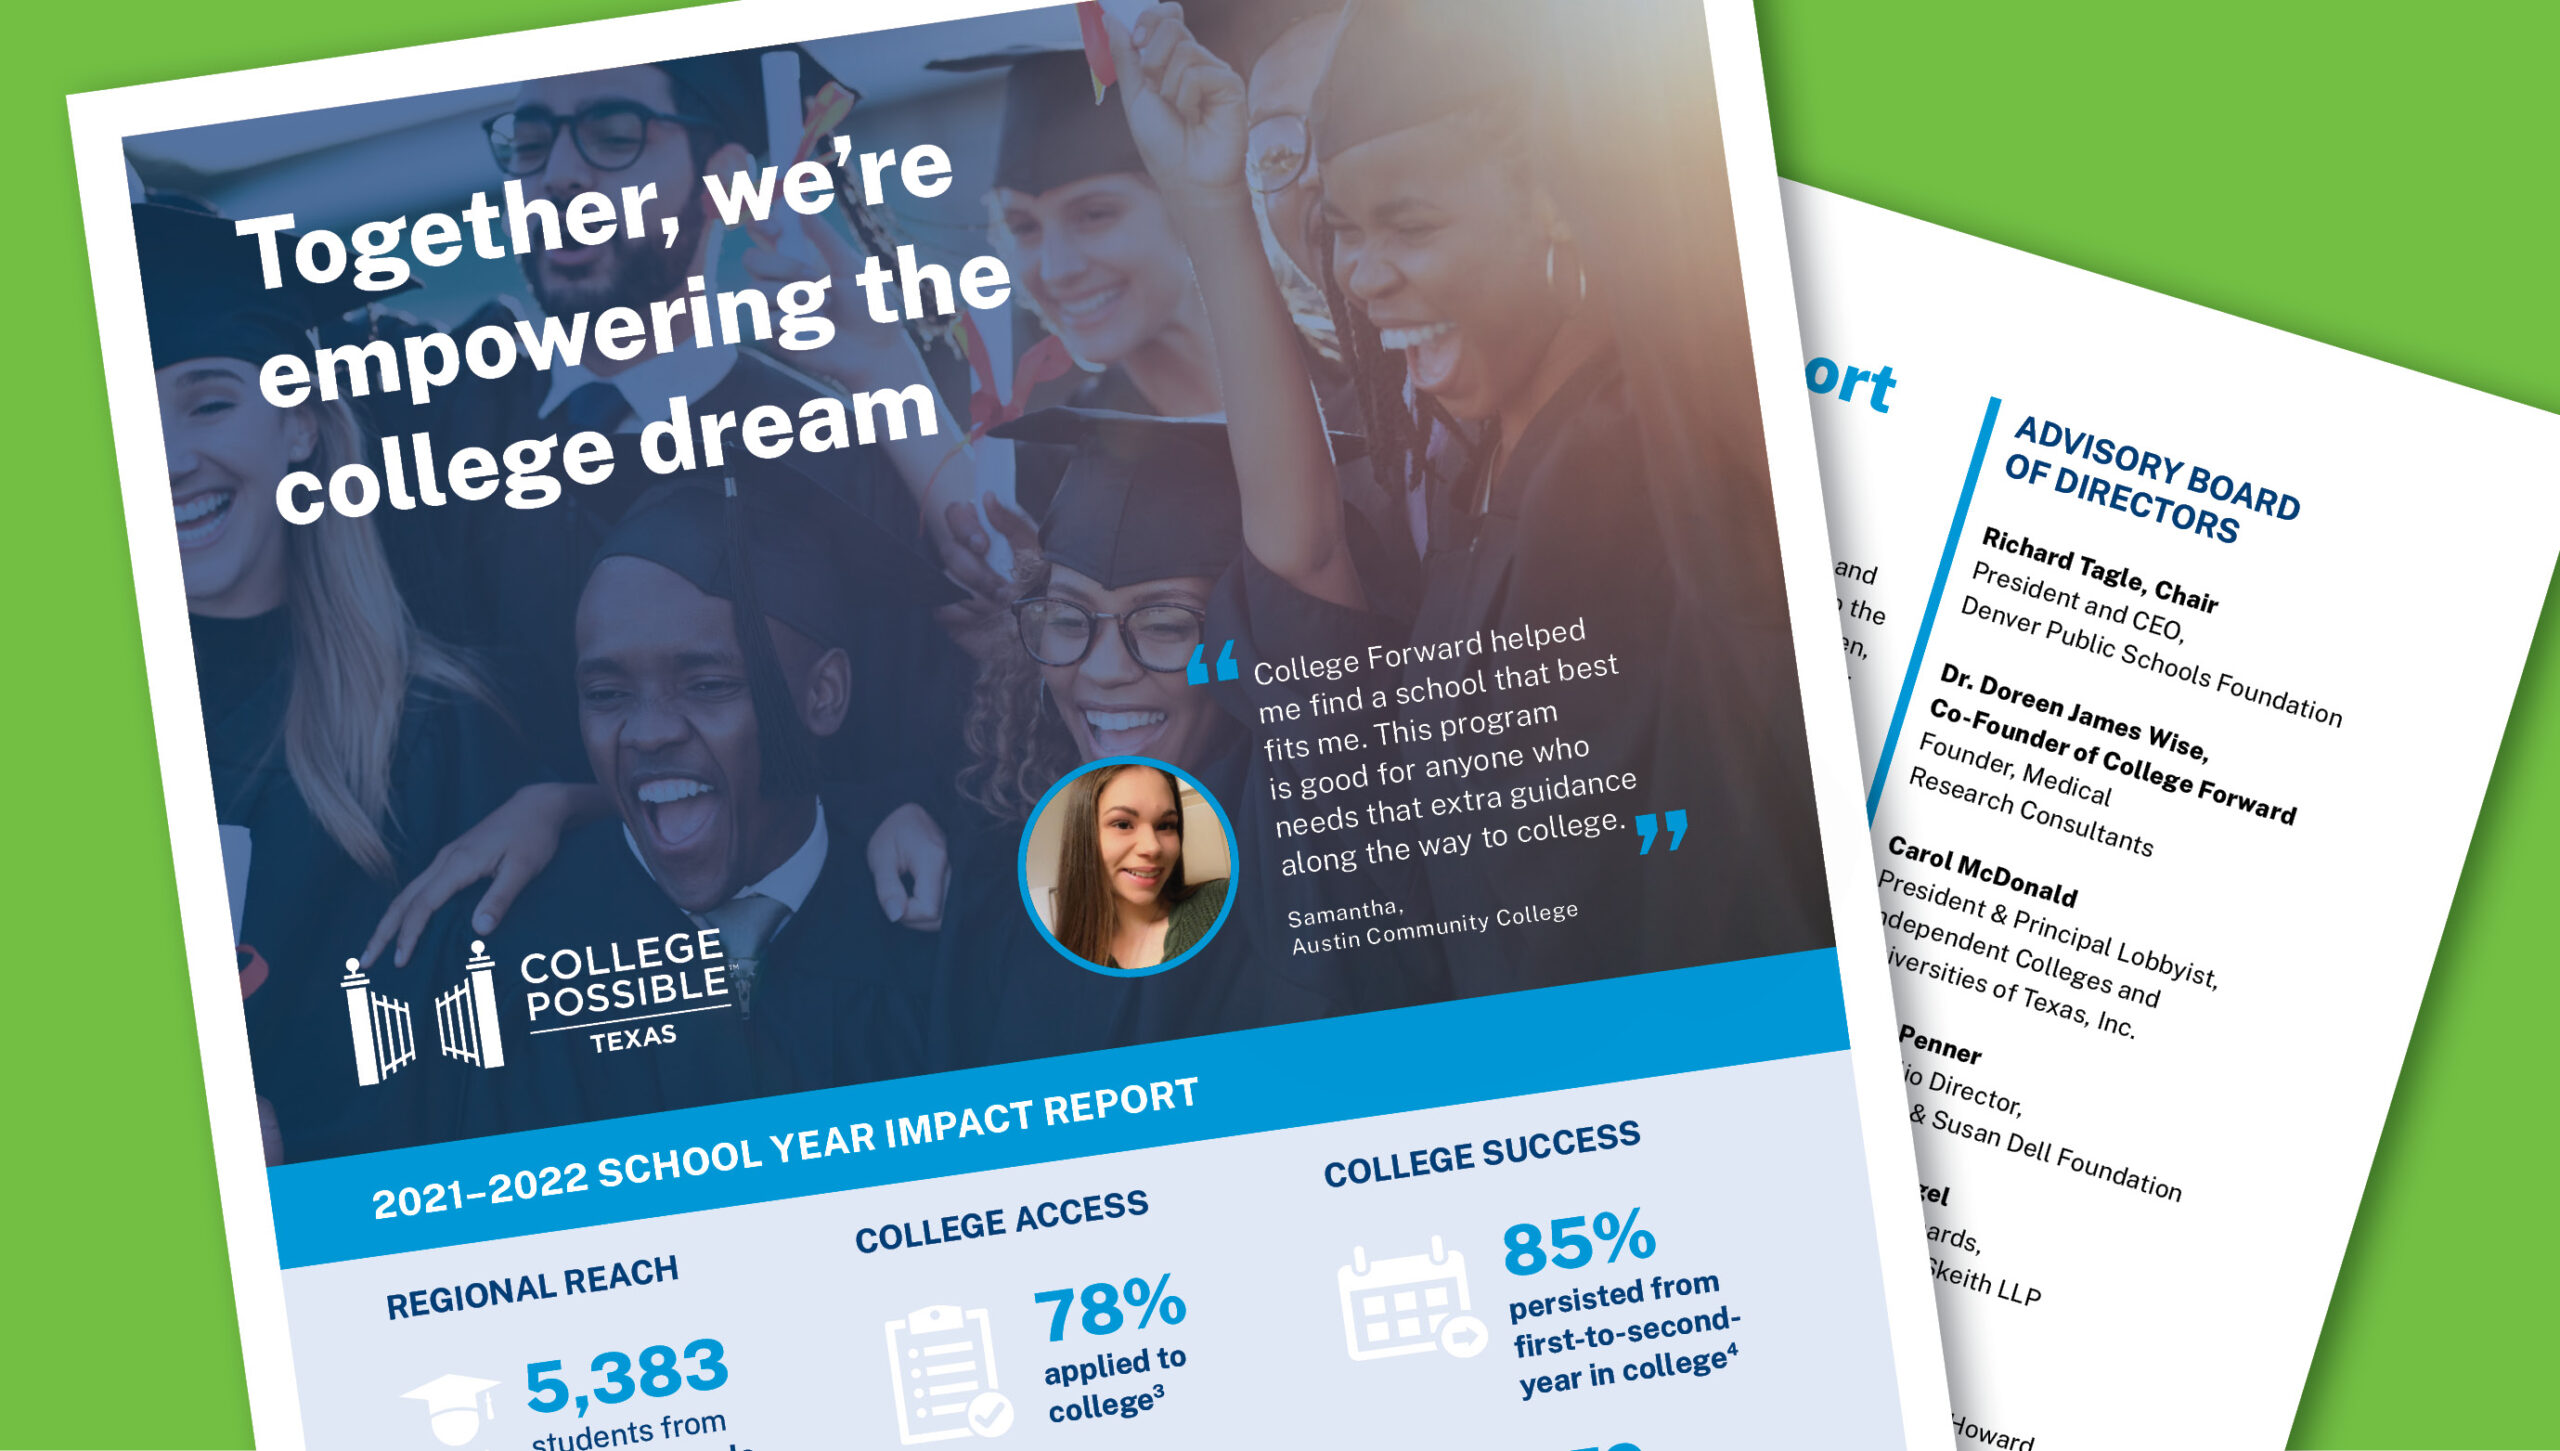 A preview image of the College Possible Texas impact report, showing parts of the front and back sides. The main headline that is visible reads "Together, we're empowering the college dream"